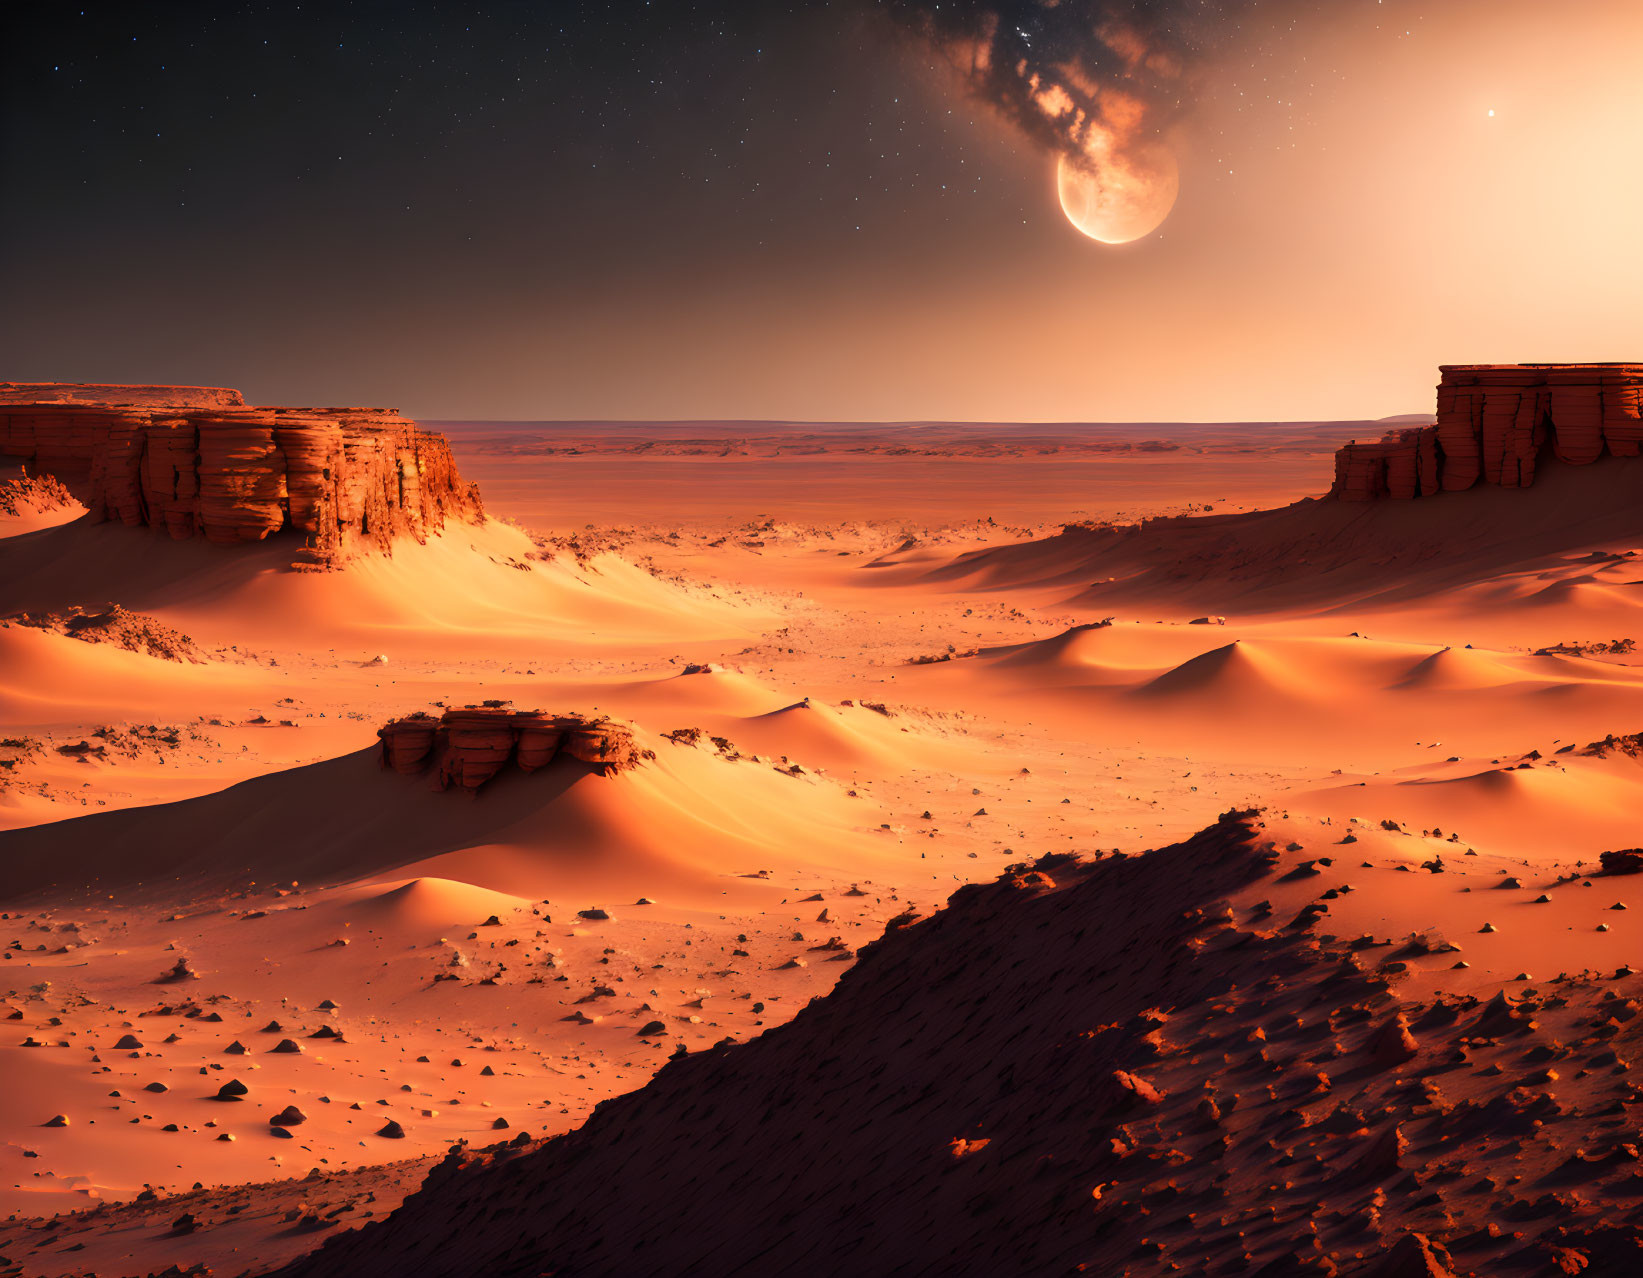 Desert landscape at twilight with sand dunes, rock formations, moon, and stars